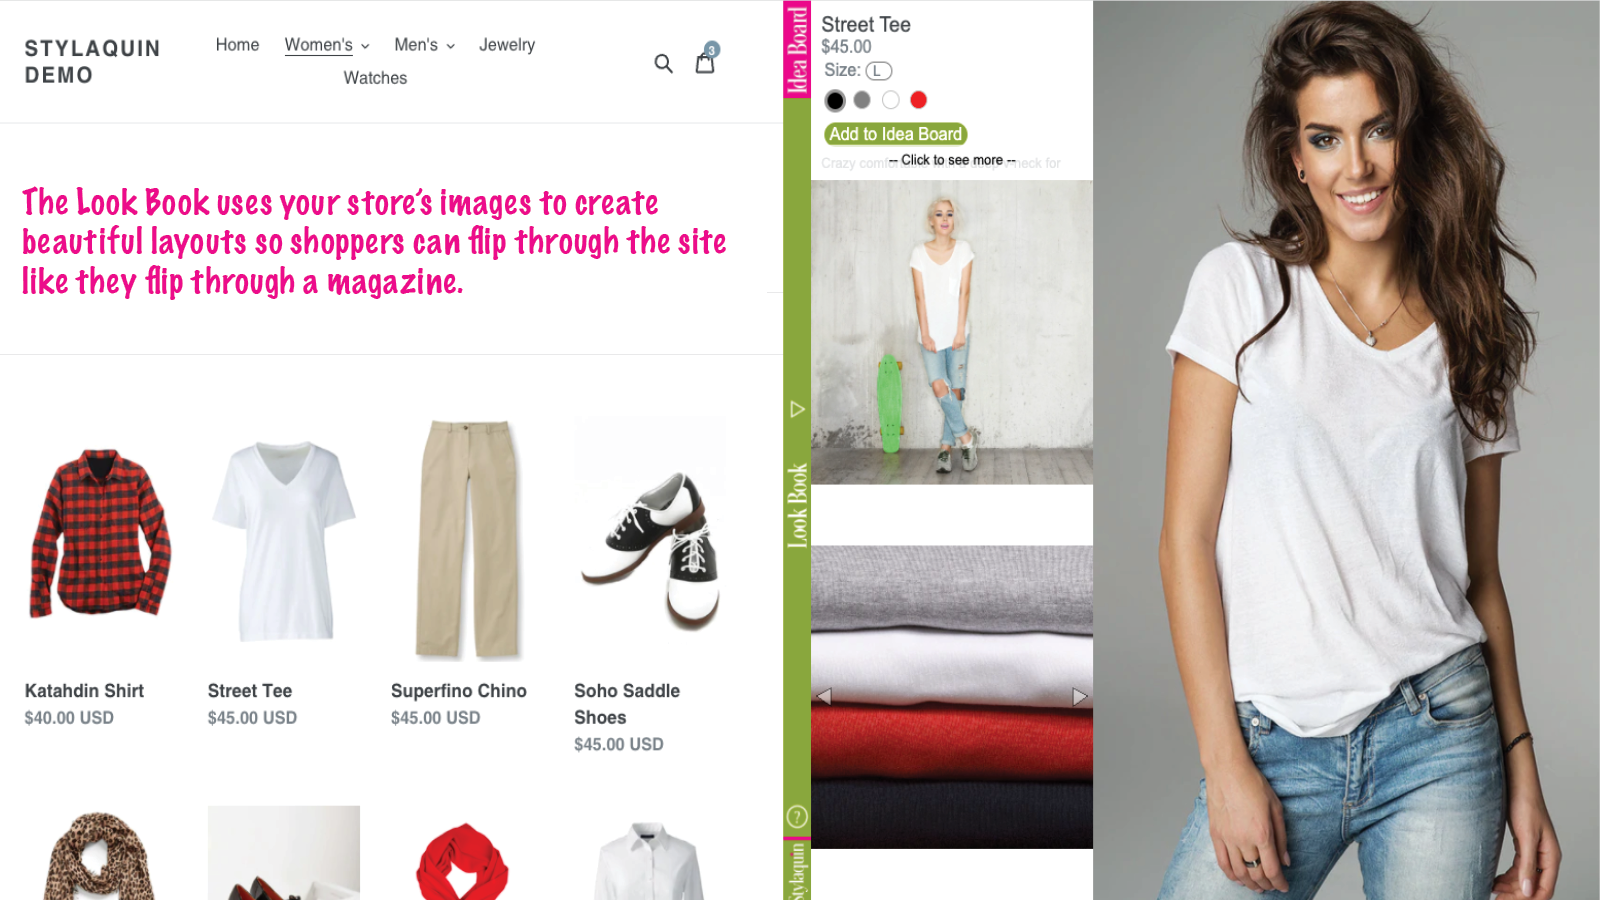 Stylaquin uses your store’s pics to make beautiful layouts.